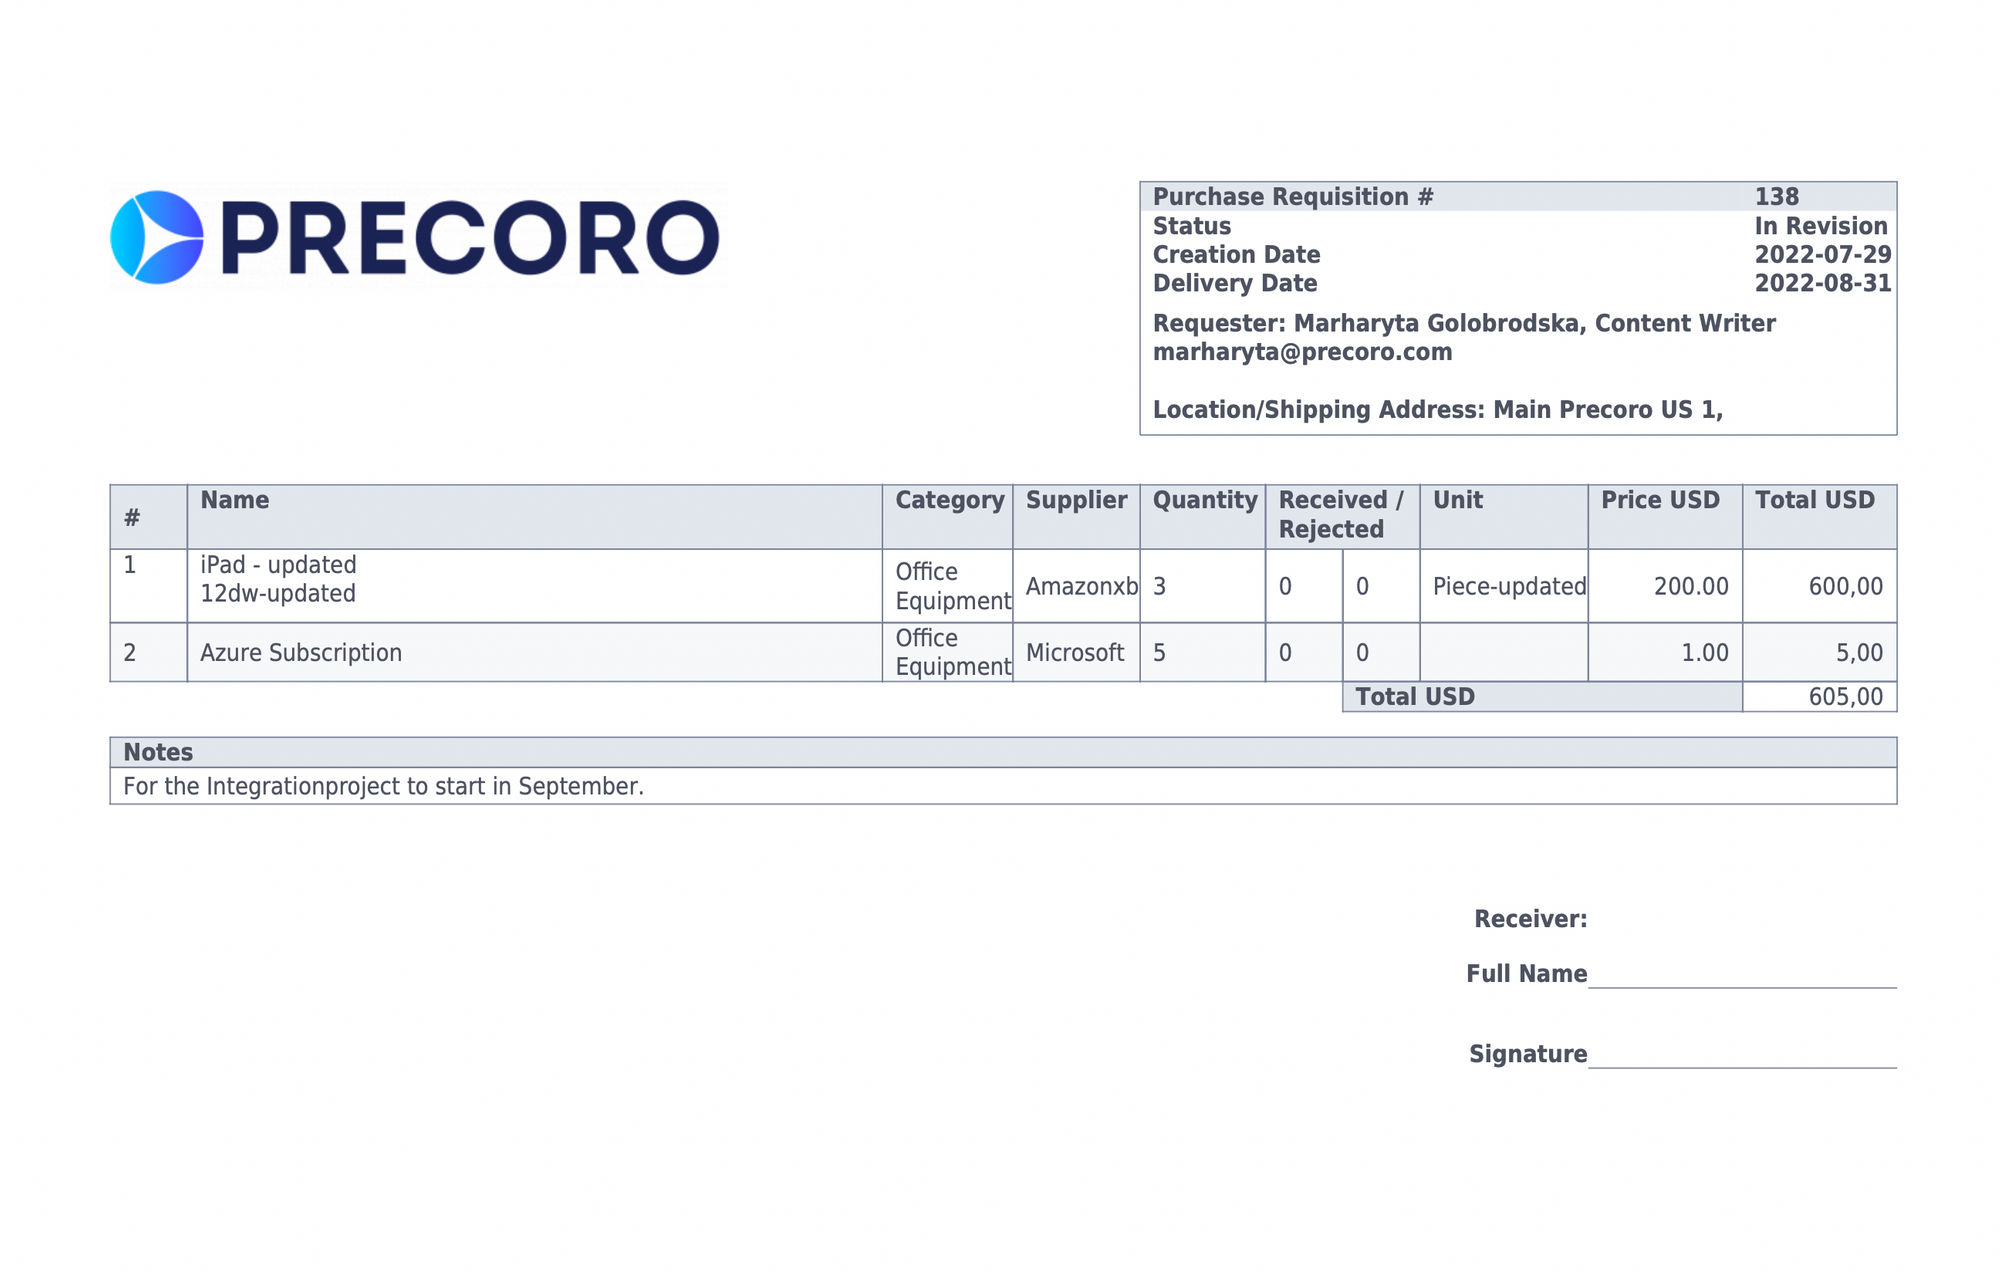 An example of purchase requisition from Precoro